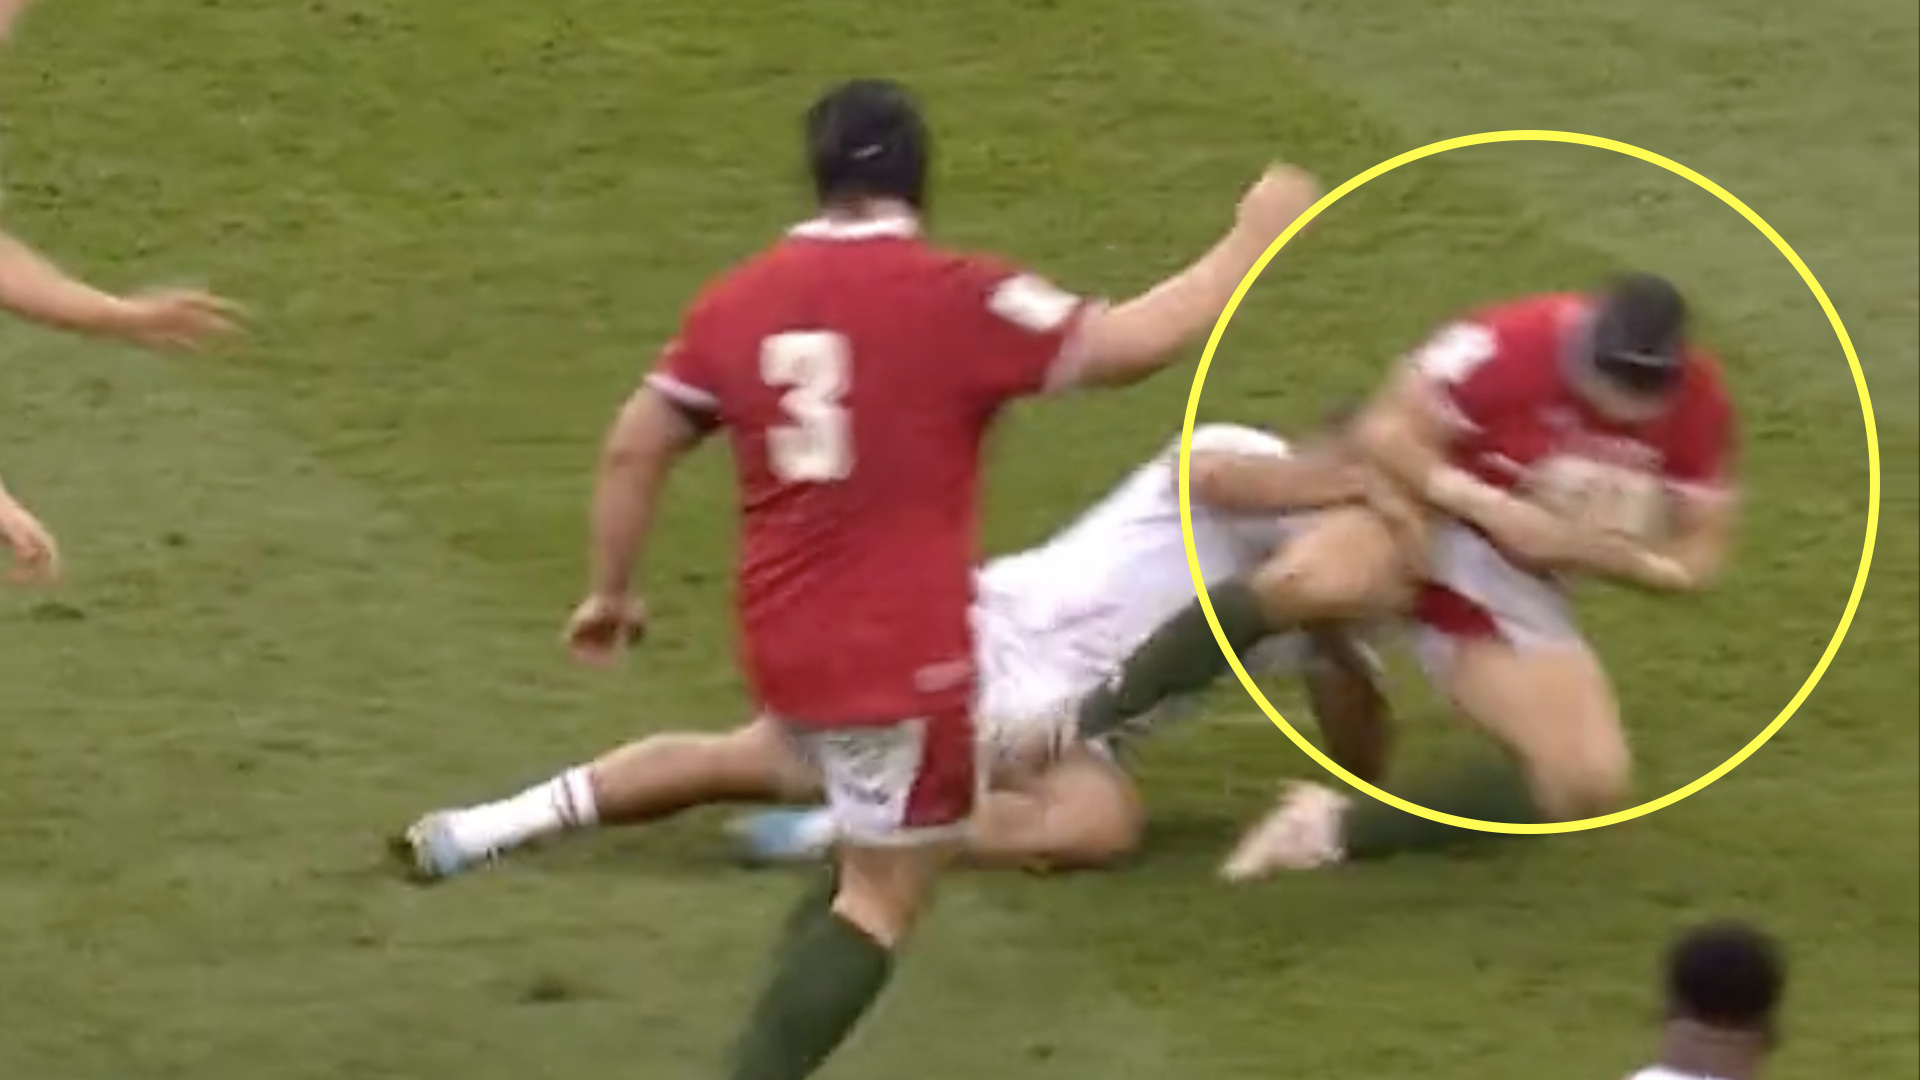 Halfpenny officially the hardest fullback ever after surviving England onslaught